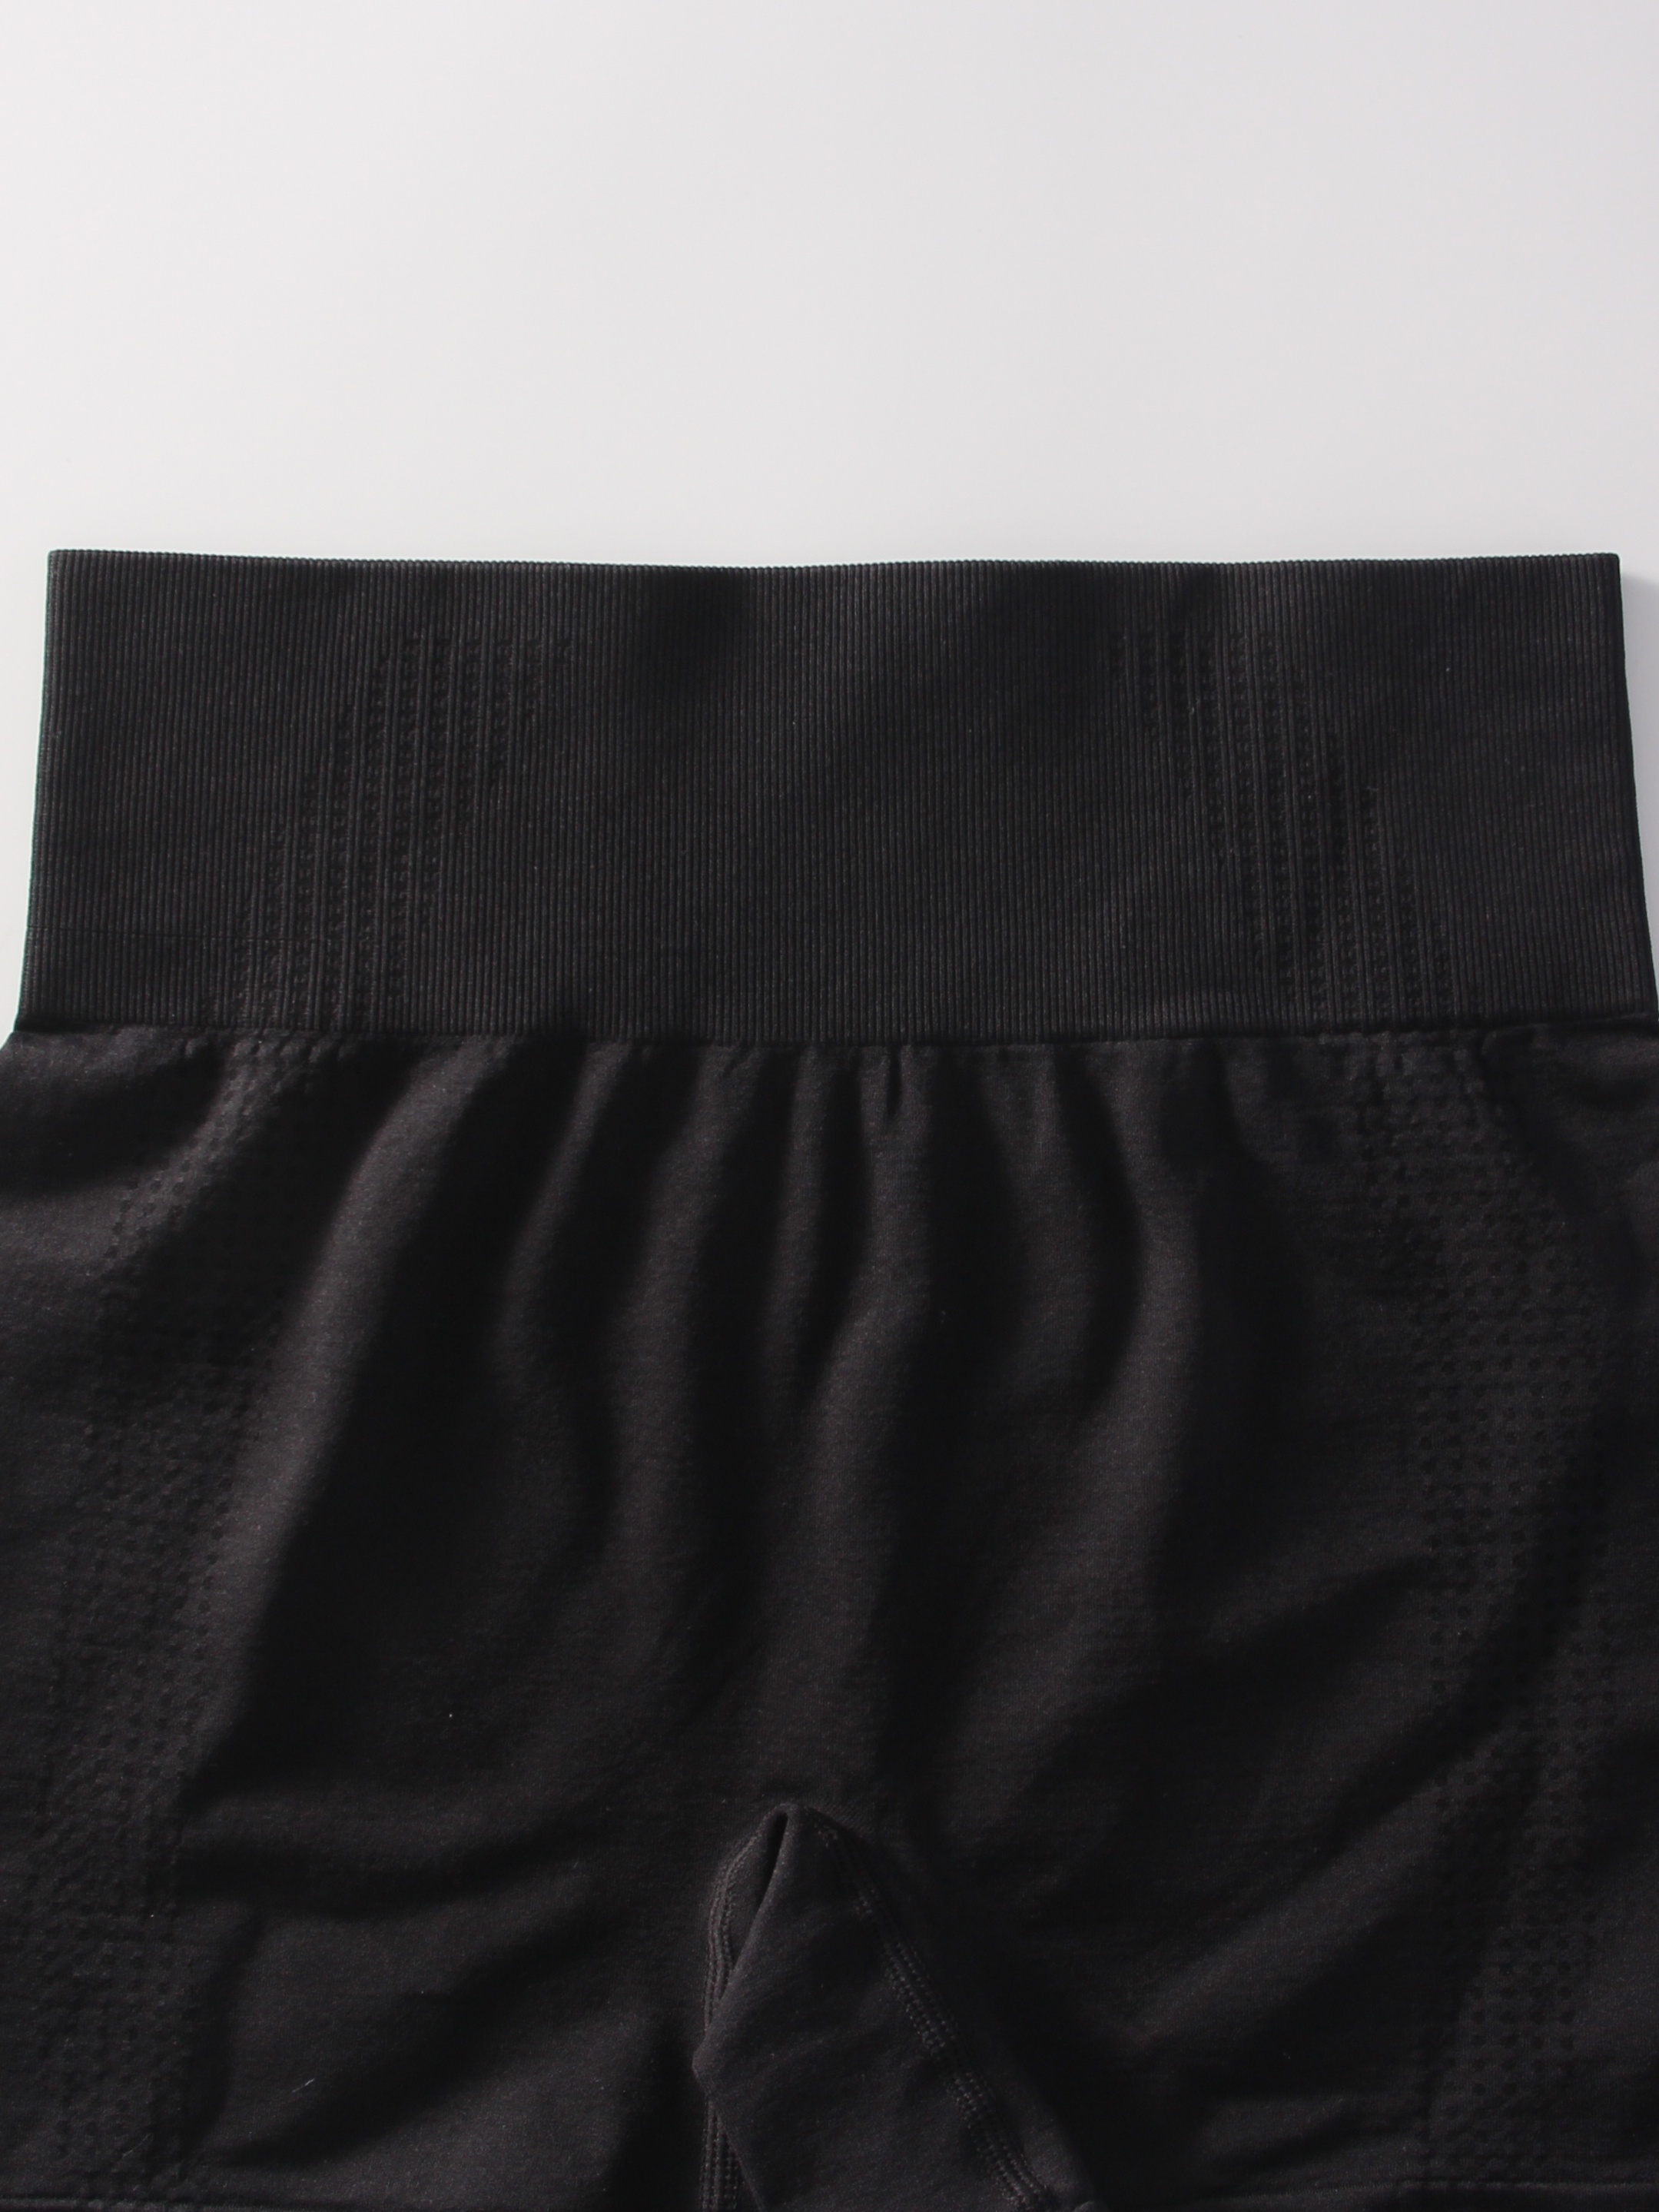 NWOT Everlane Black The Perform High Waisted Athletic Leggings Sz Small